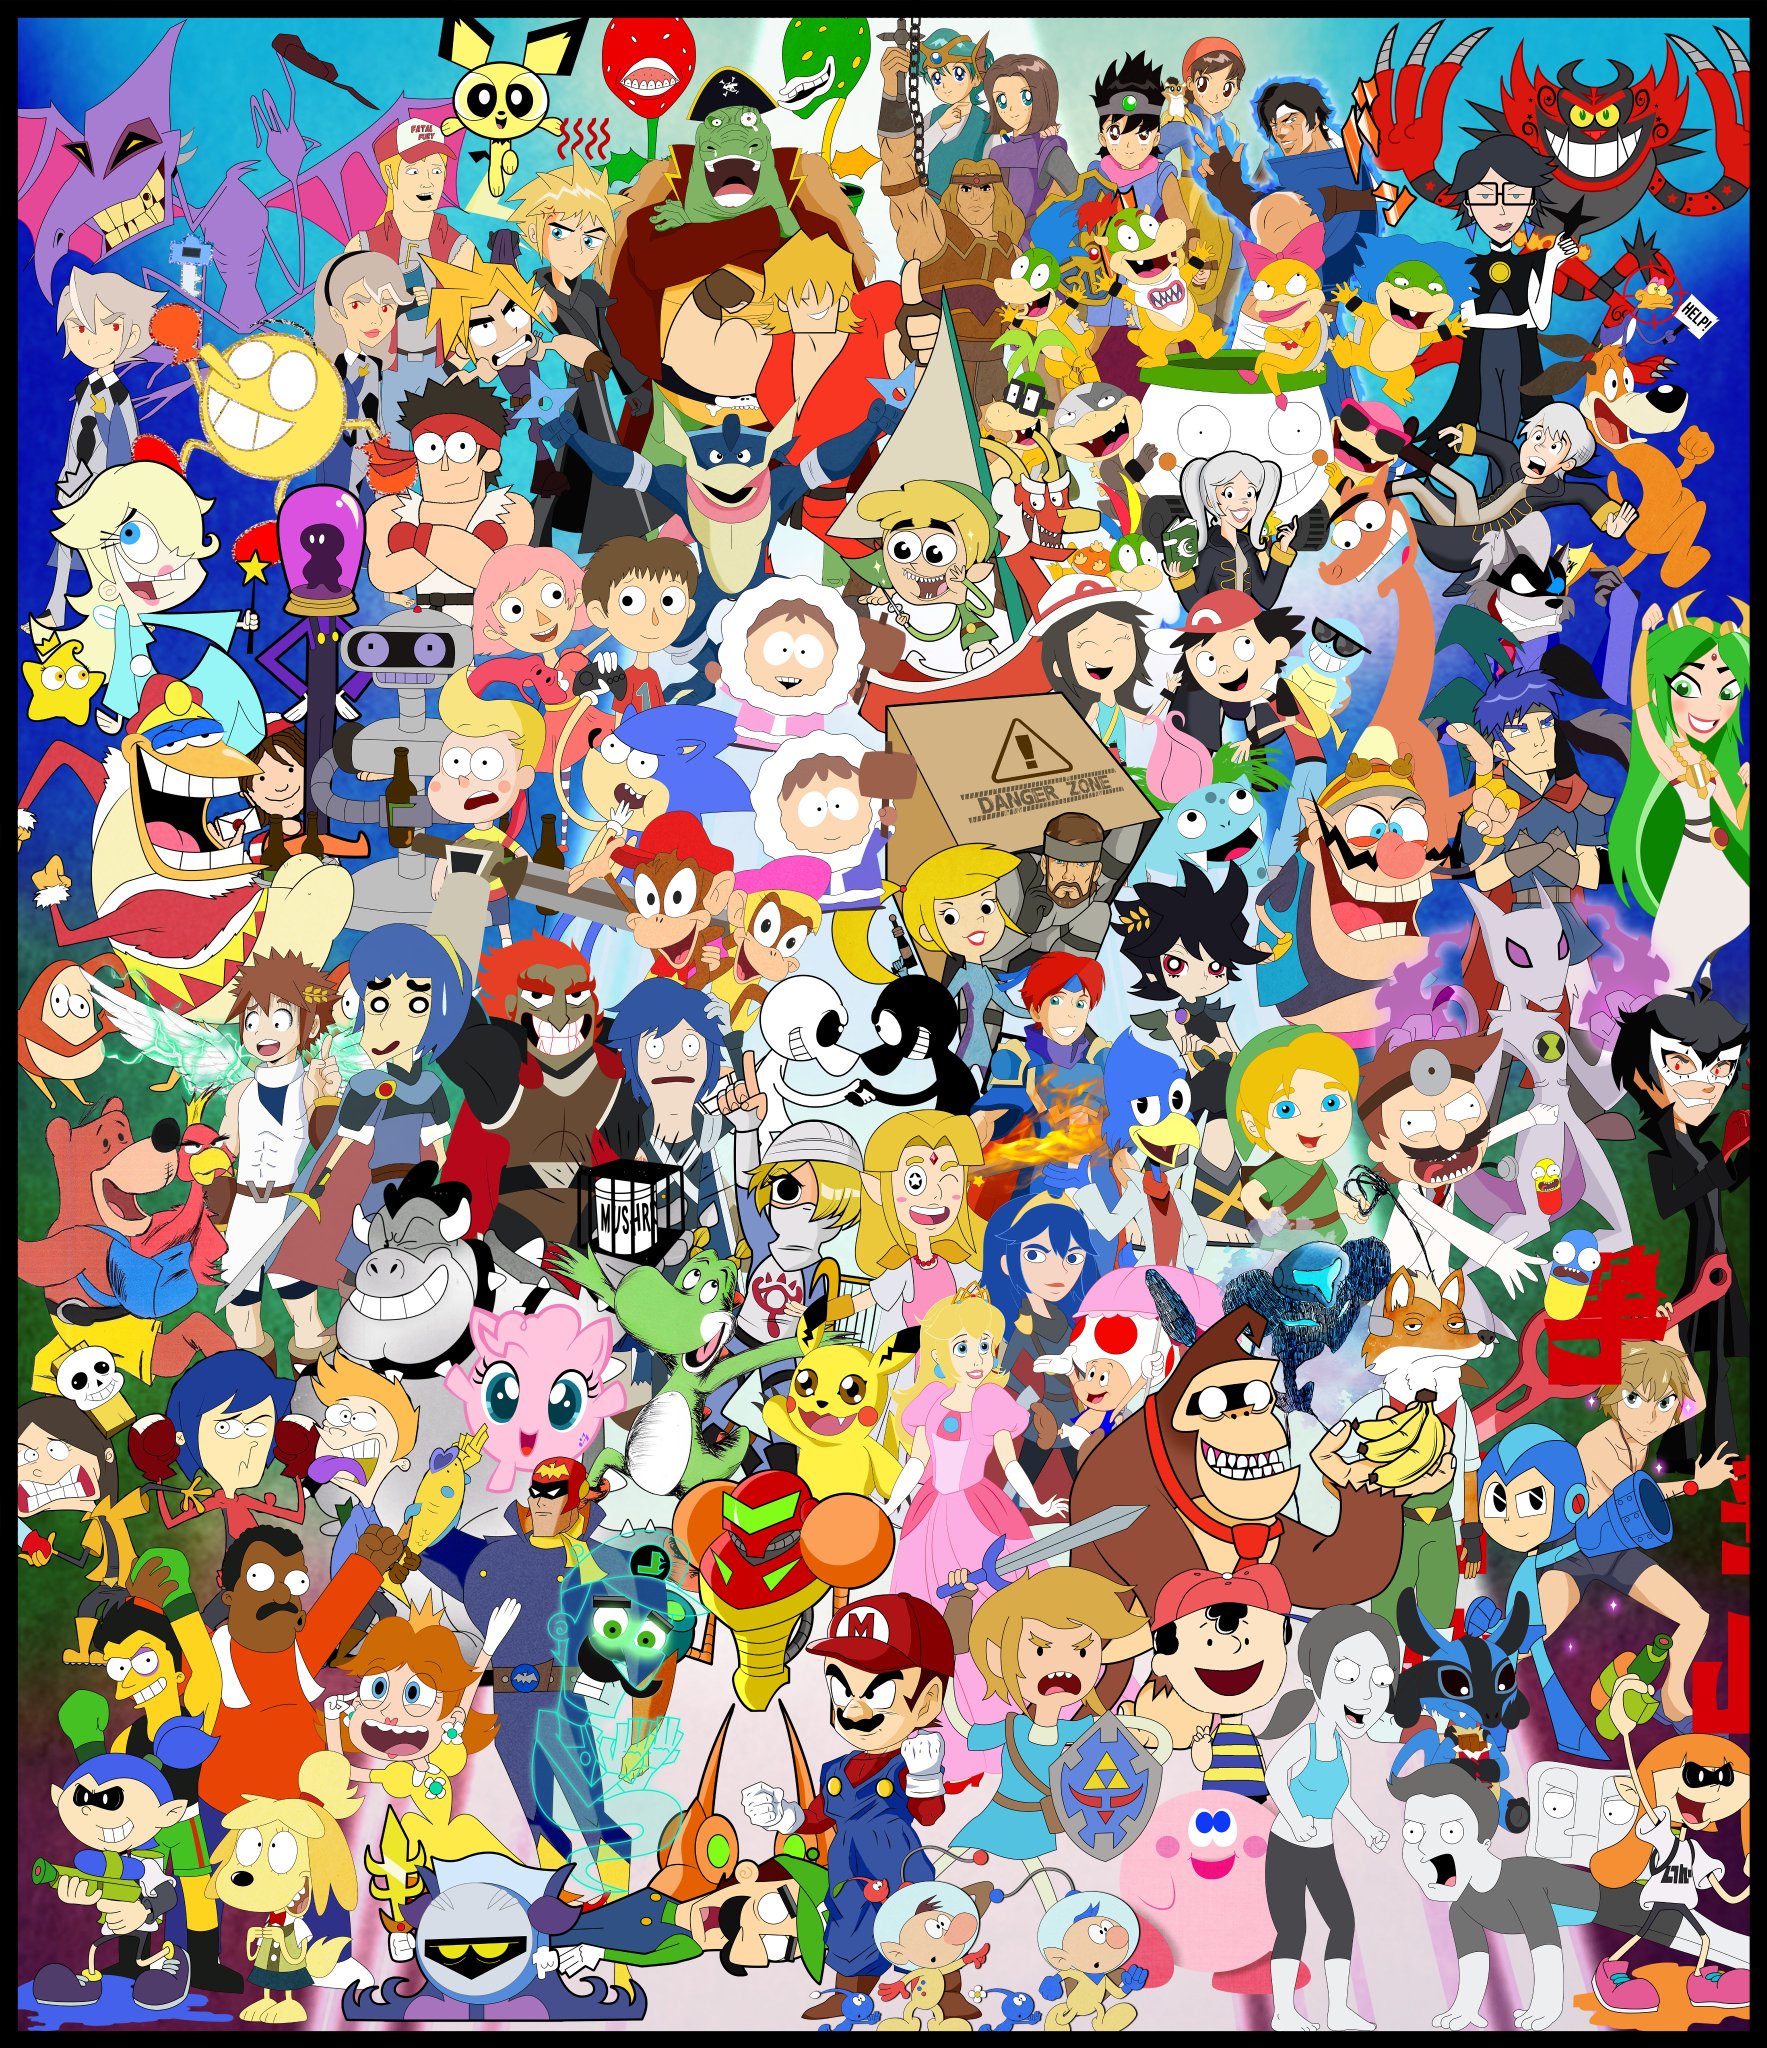 Smash Bros Roster done in different cartoon styles! 
#SuperSmashBro...